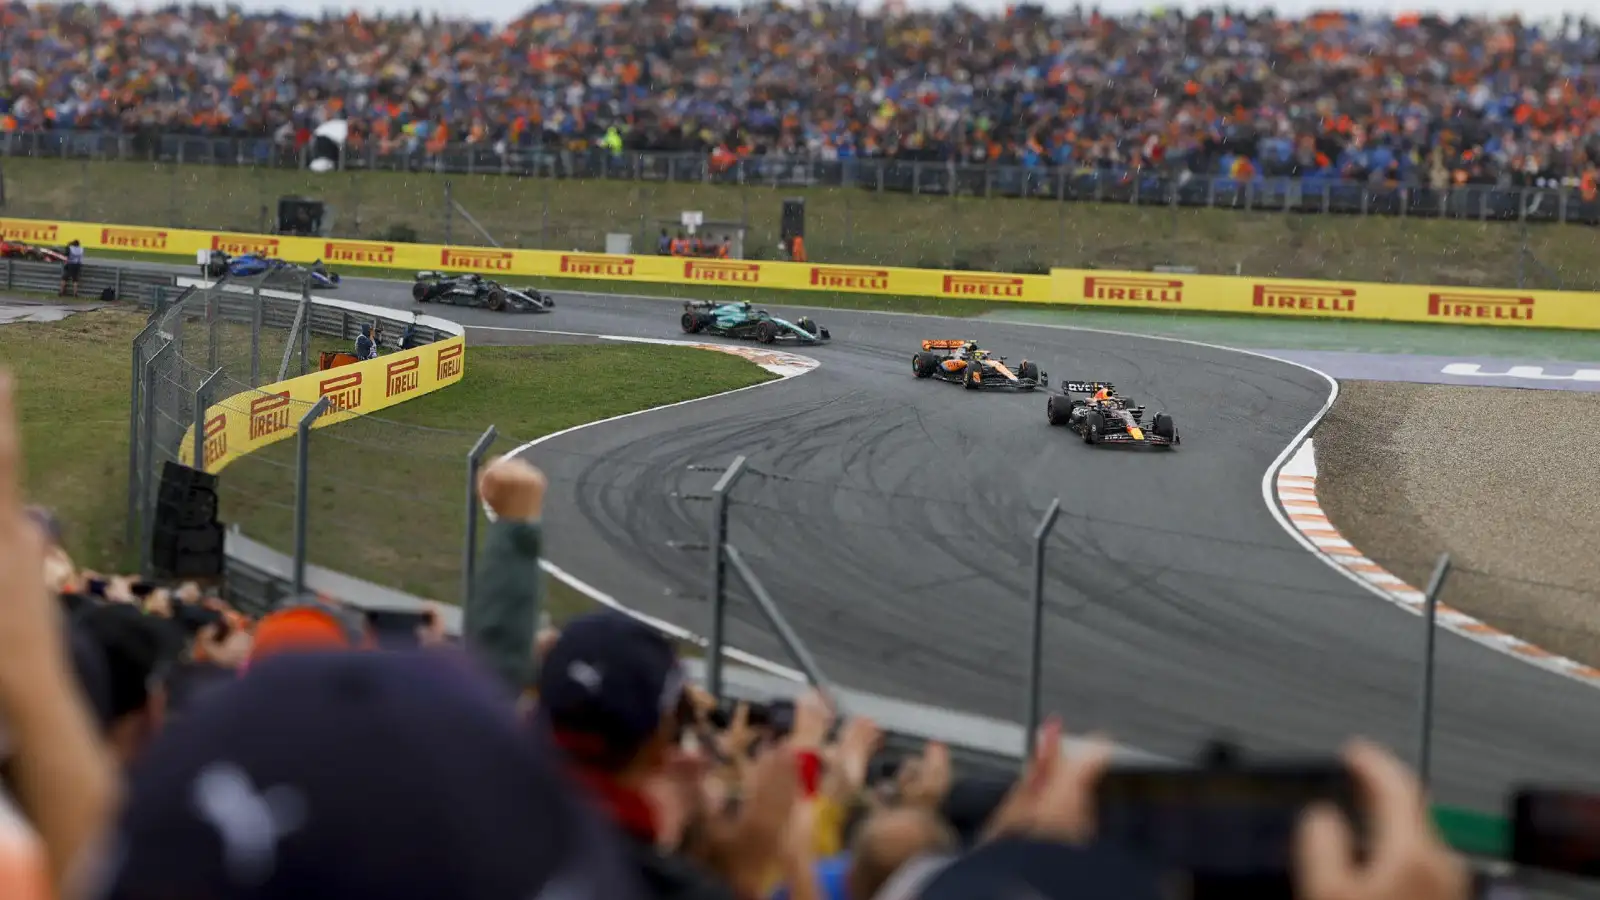 Red Bull's Max Verstappen leads at Zandvoort for the Dutch Grand Prix.